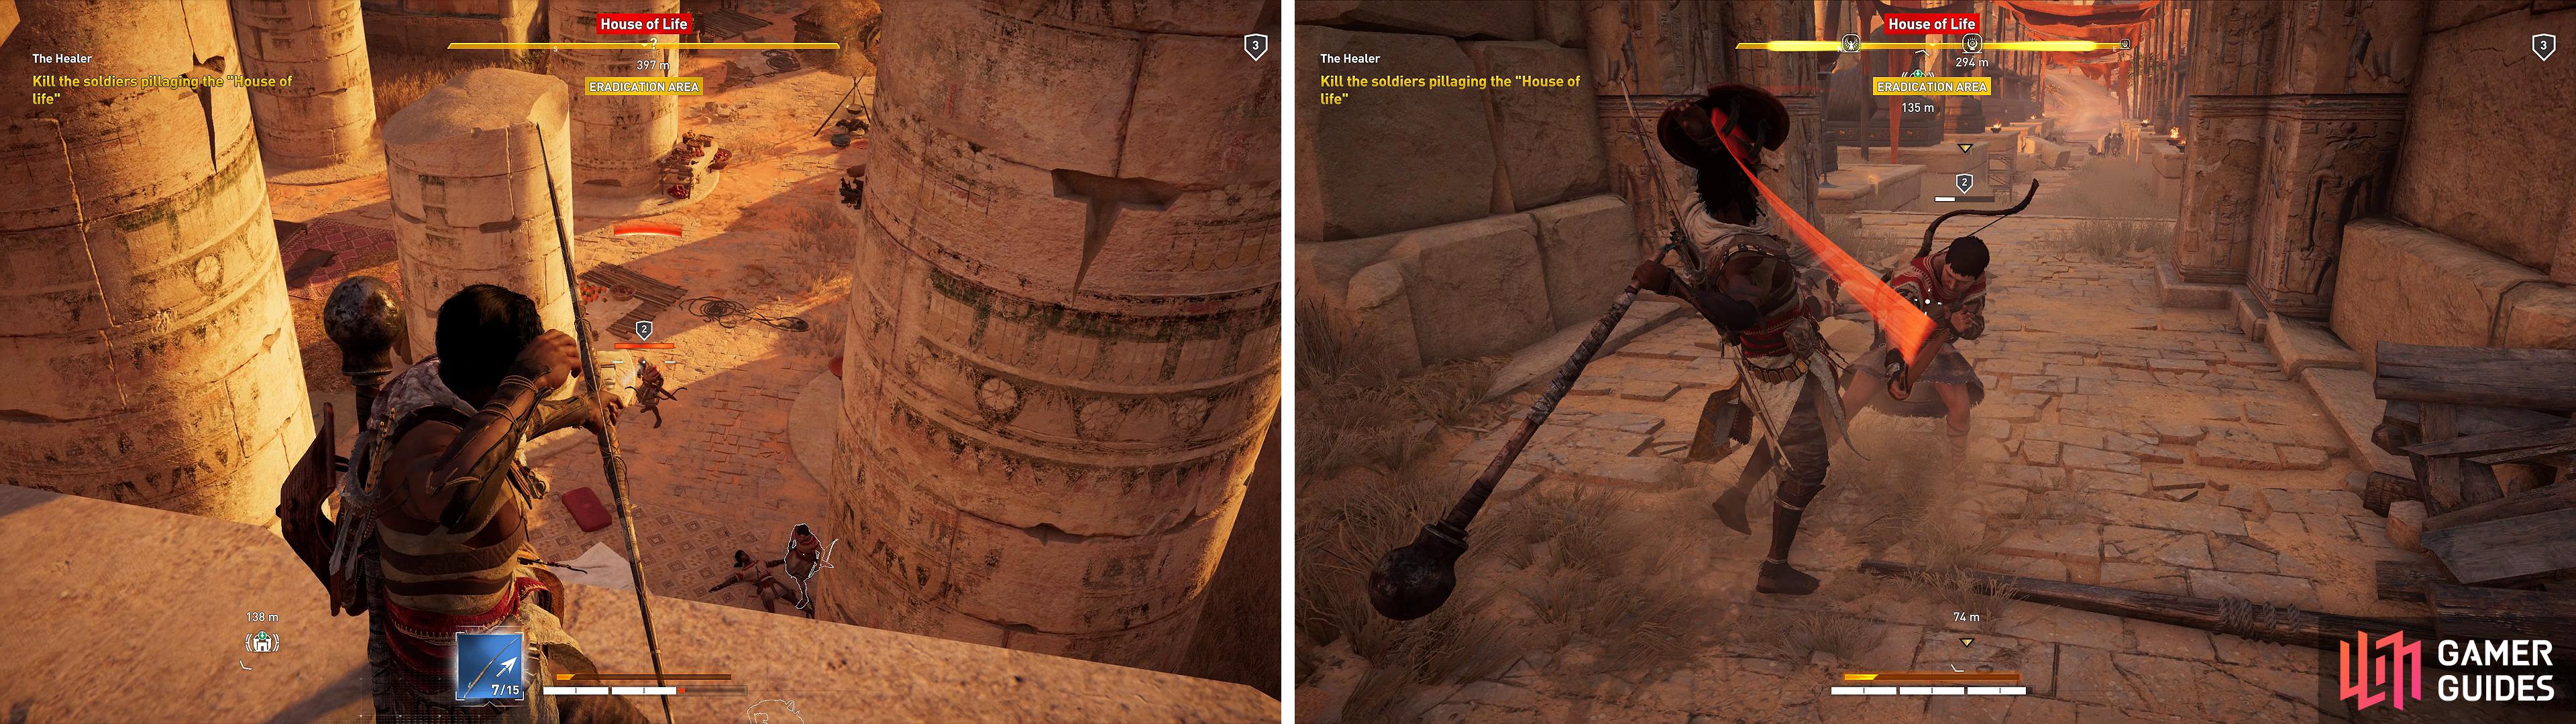 You can snipe many of the enemies from the roof with your bow (left) or you can run in all guns blazing (right).